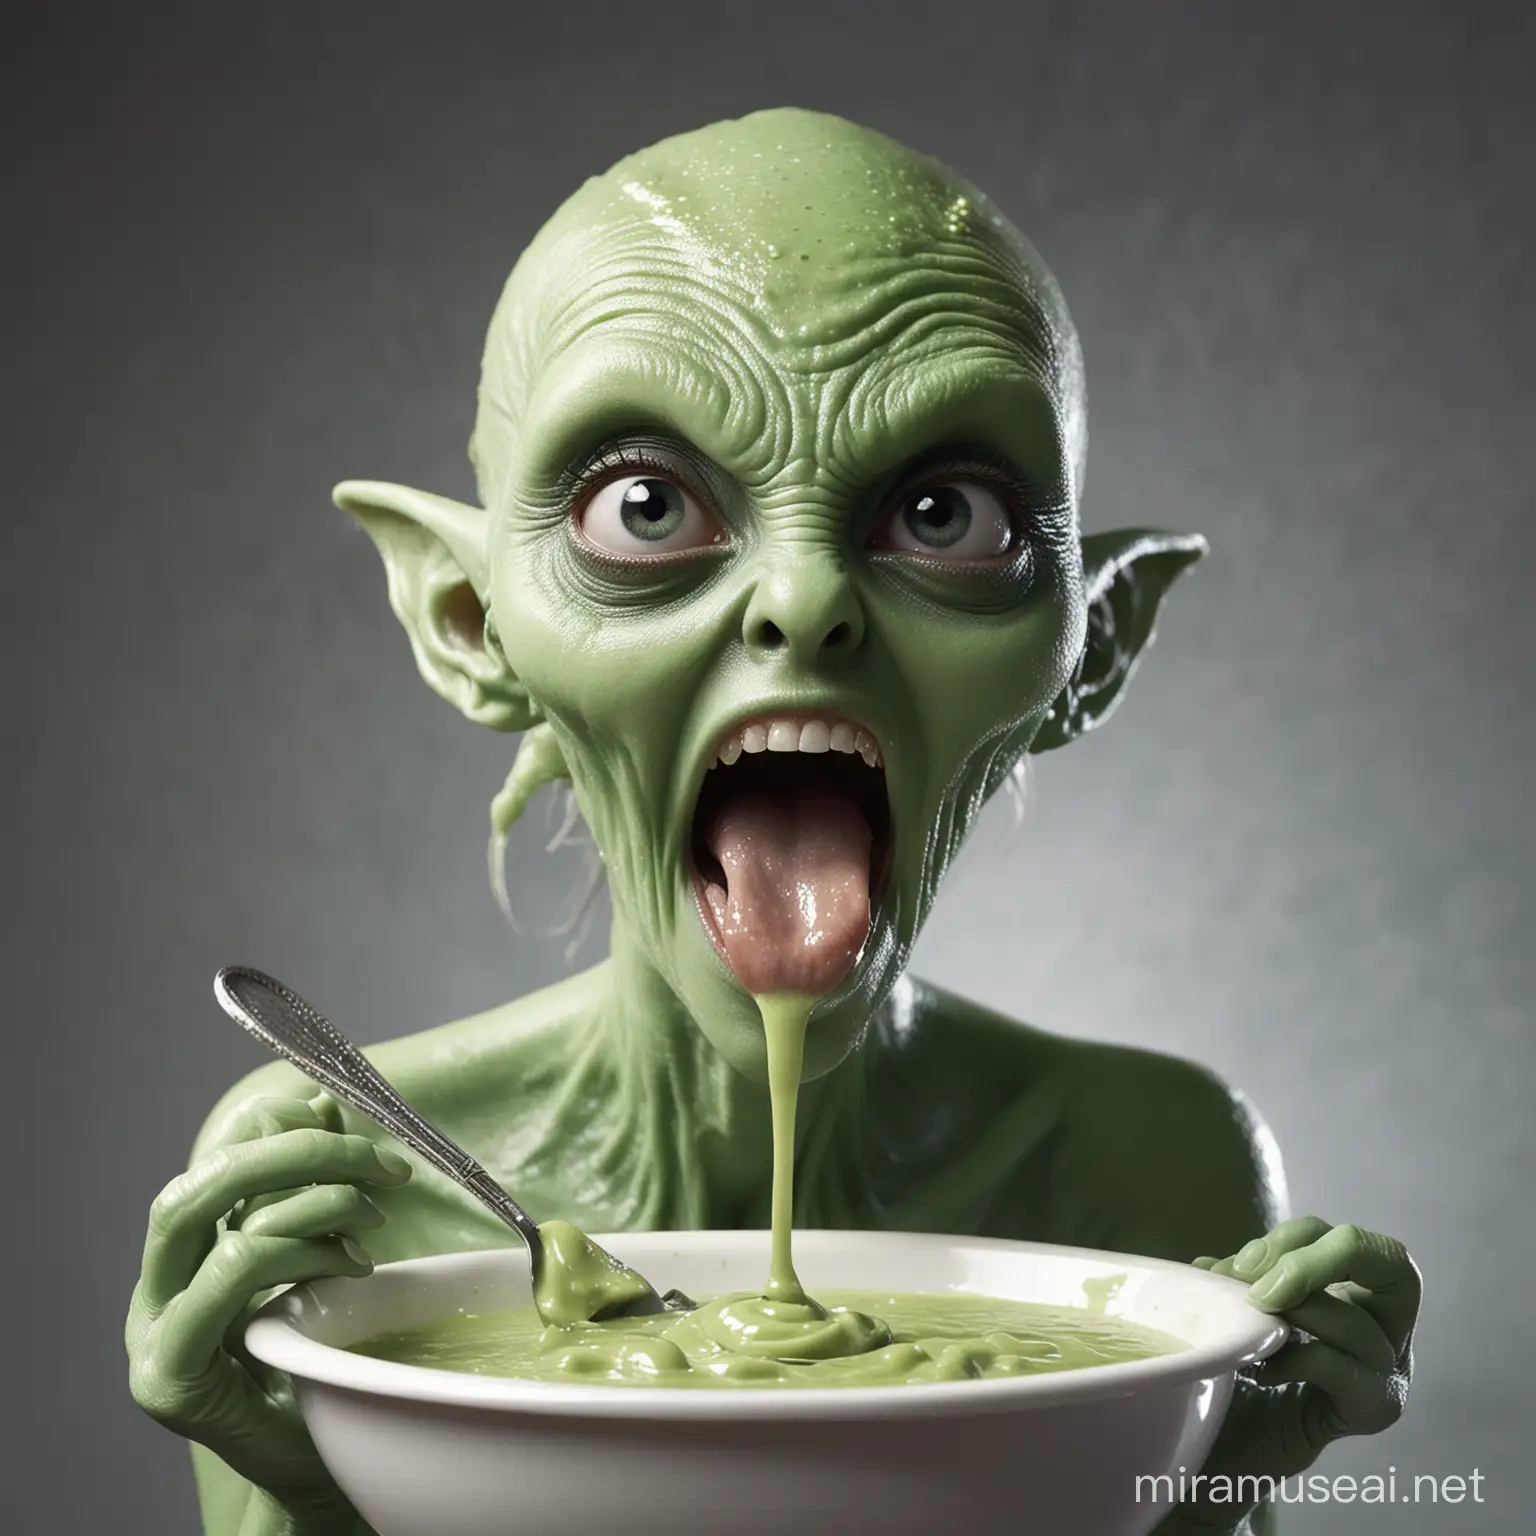 Adorable Alien About to Devour Goo with Open Mouth